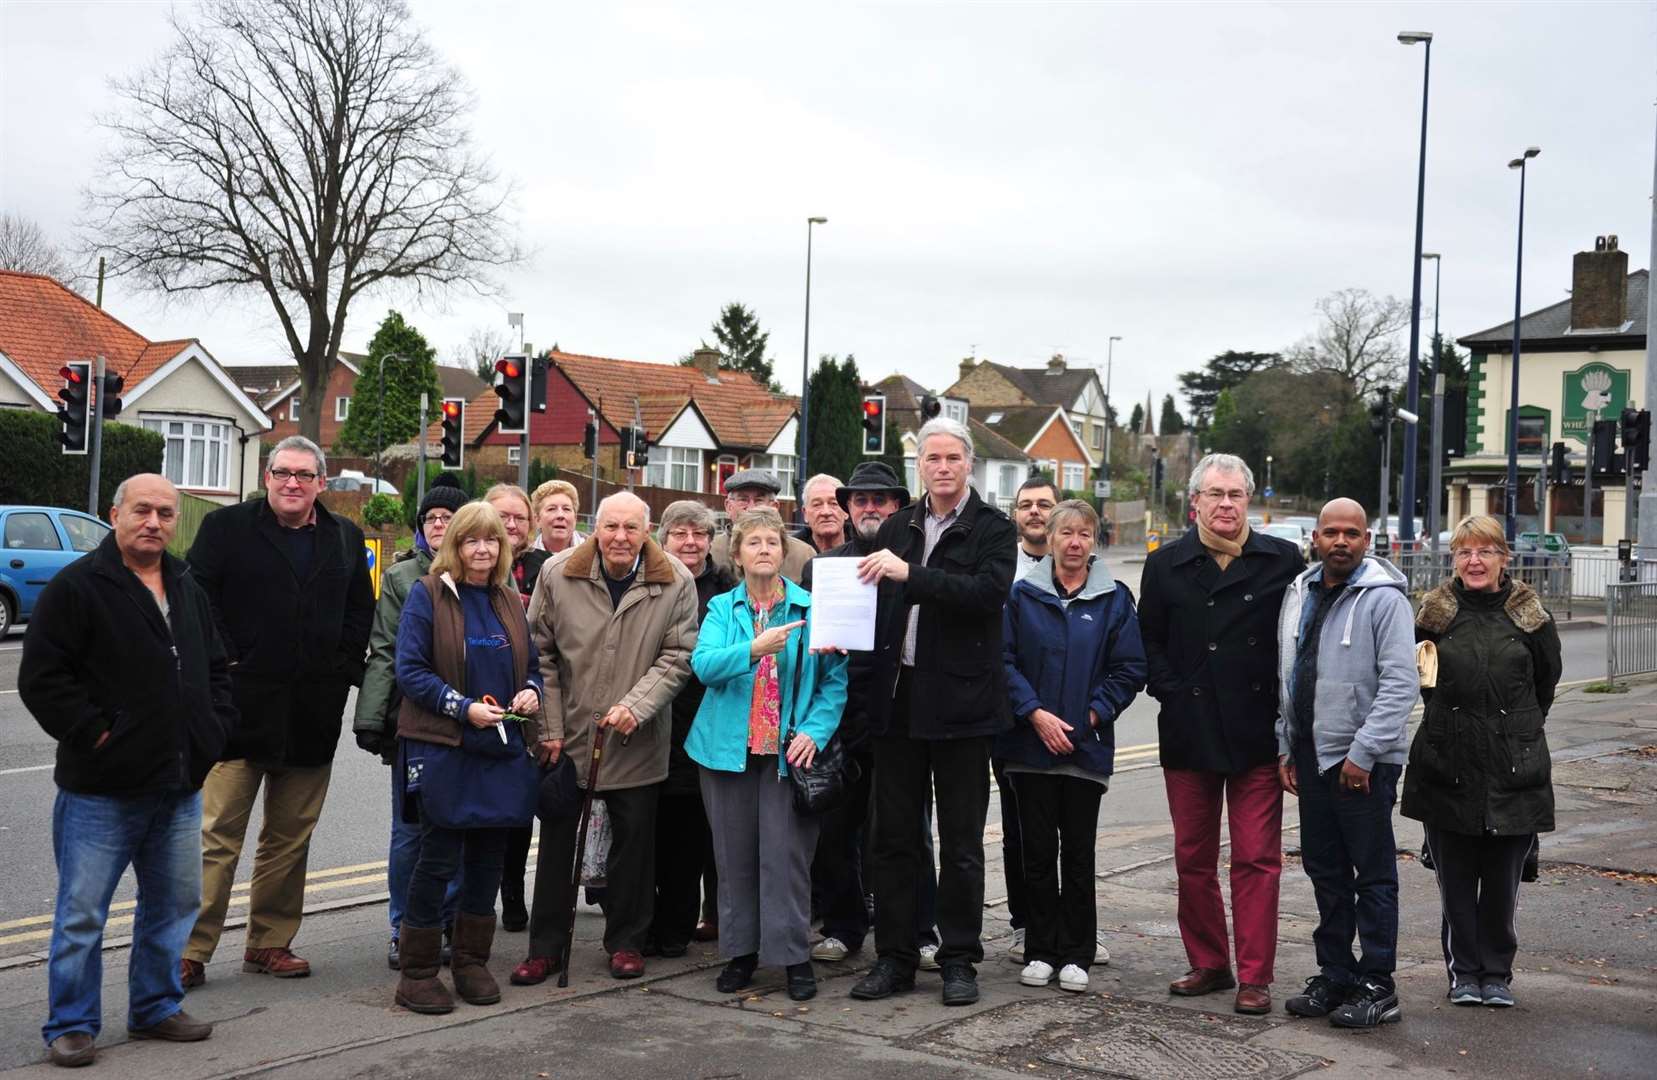 Residents with a petition against the closure of Cranborne Avenue - the photo was taken eight years ago - in 2015